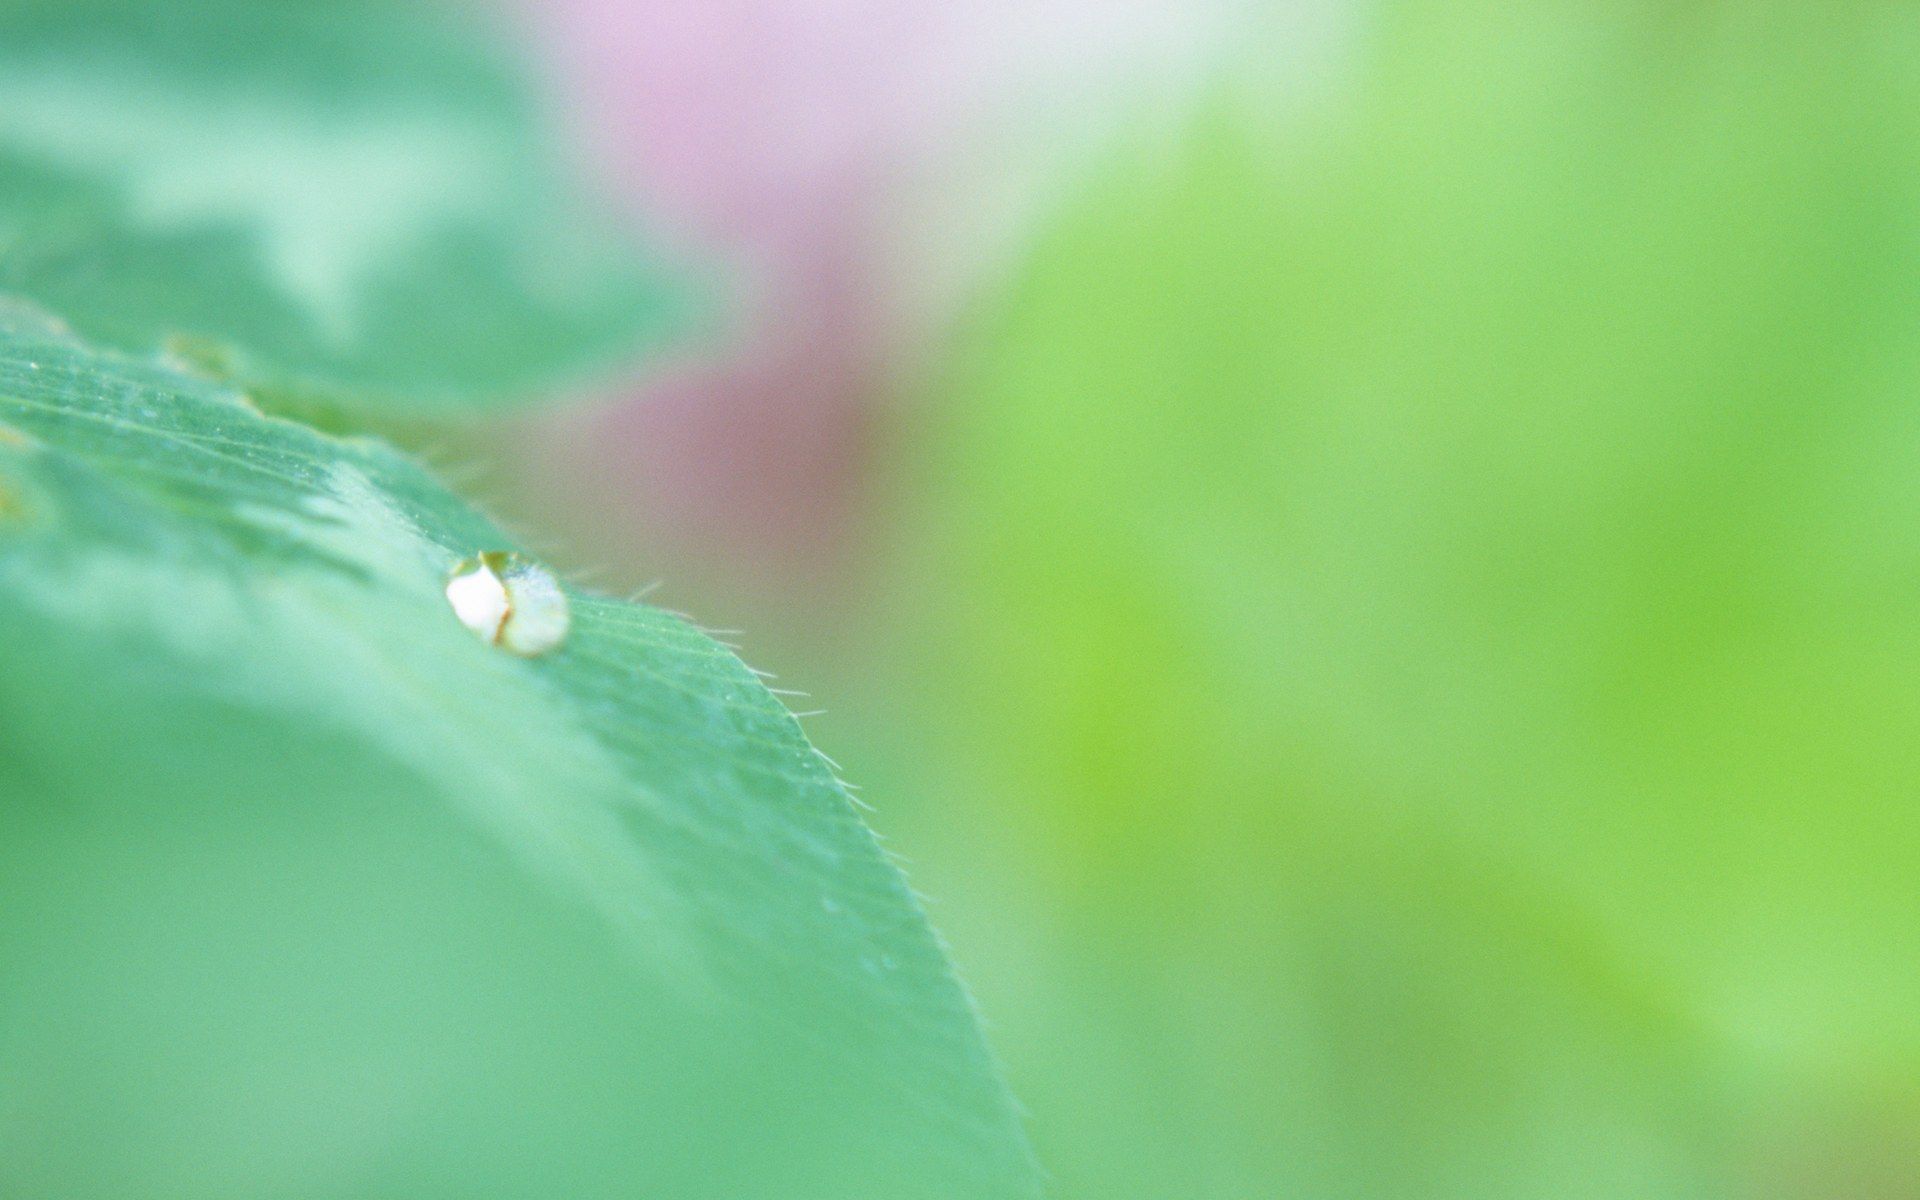 Soft Focus Photography and Fresh Green Leaves 1920x1200 NO.19 Desktop Wallpaper